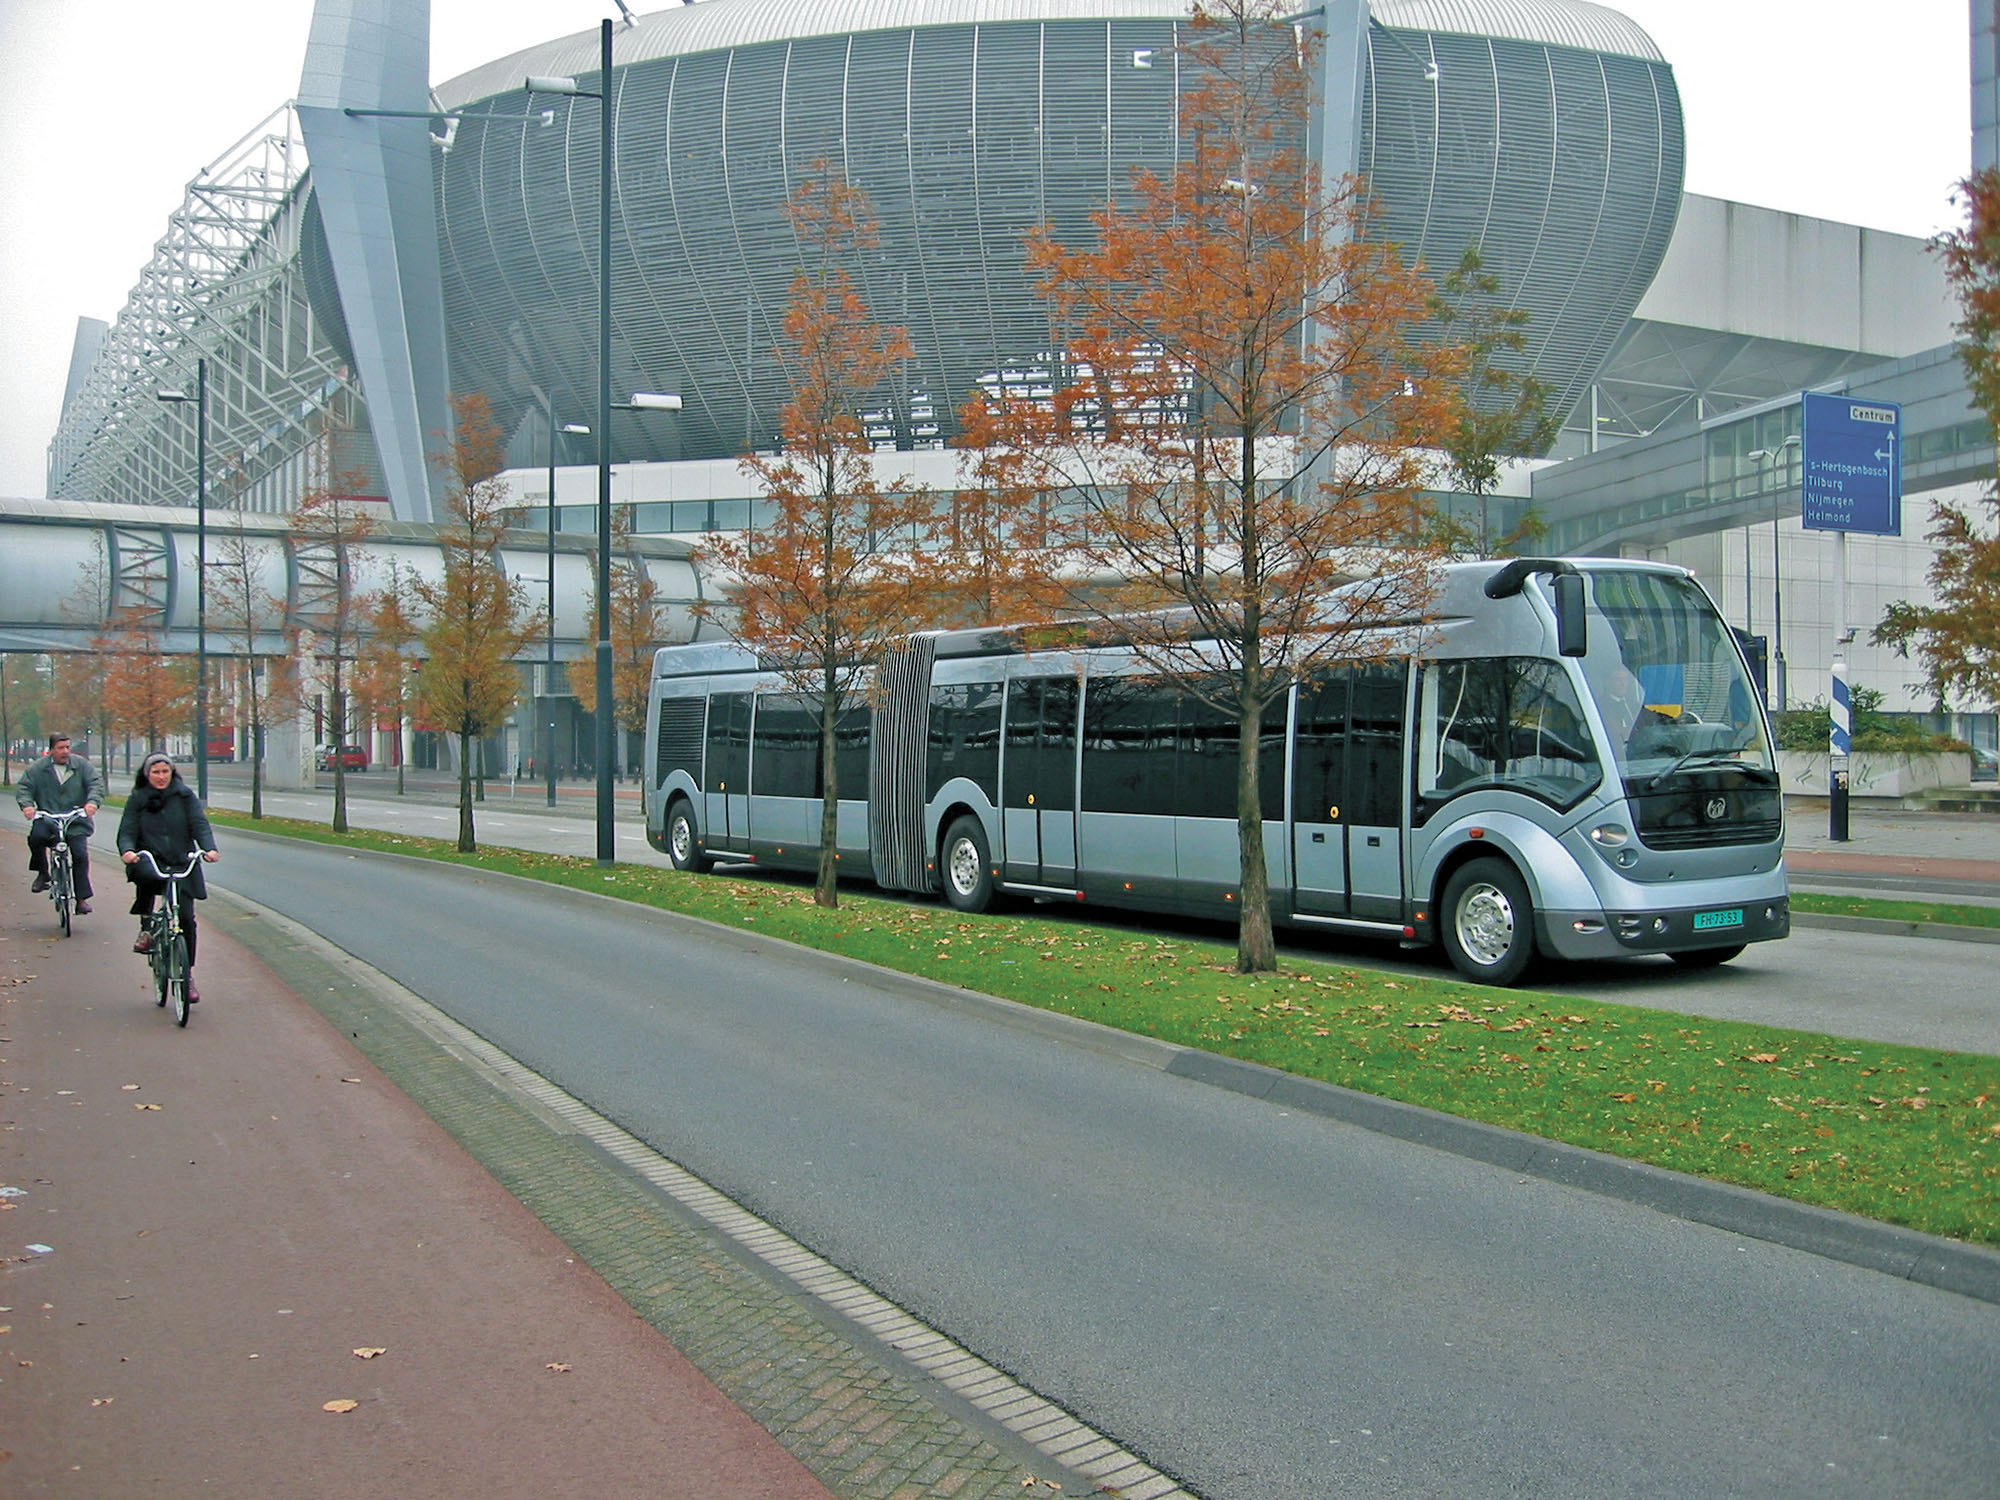 Fig. 31.9 A bike lane integrated with a BRT corridor in Eindhoven helps maximize the mobility options for residents.